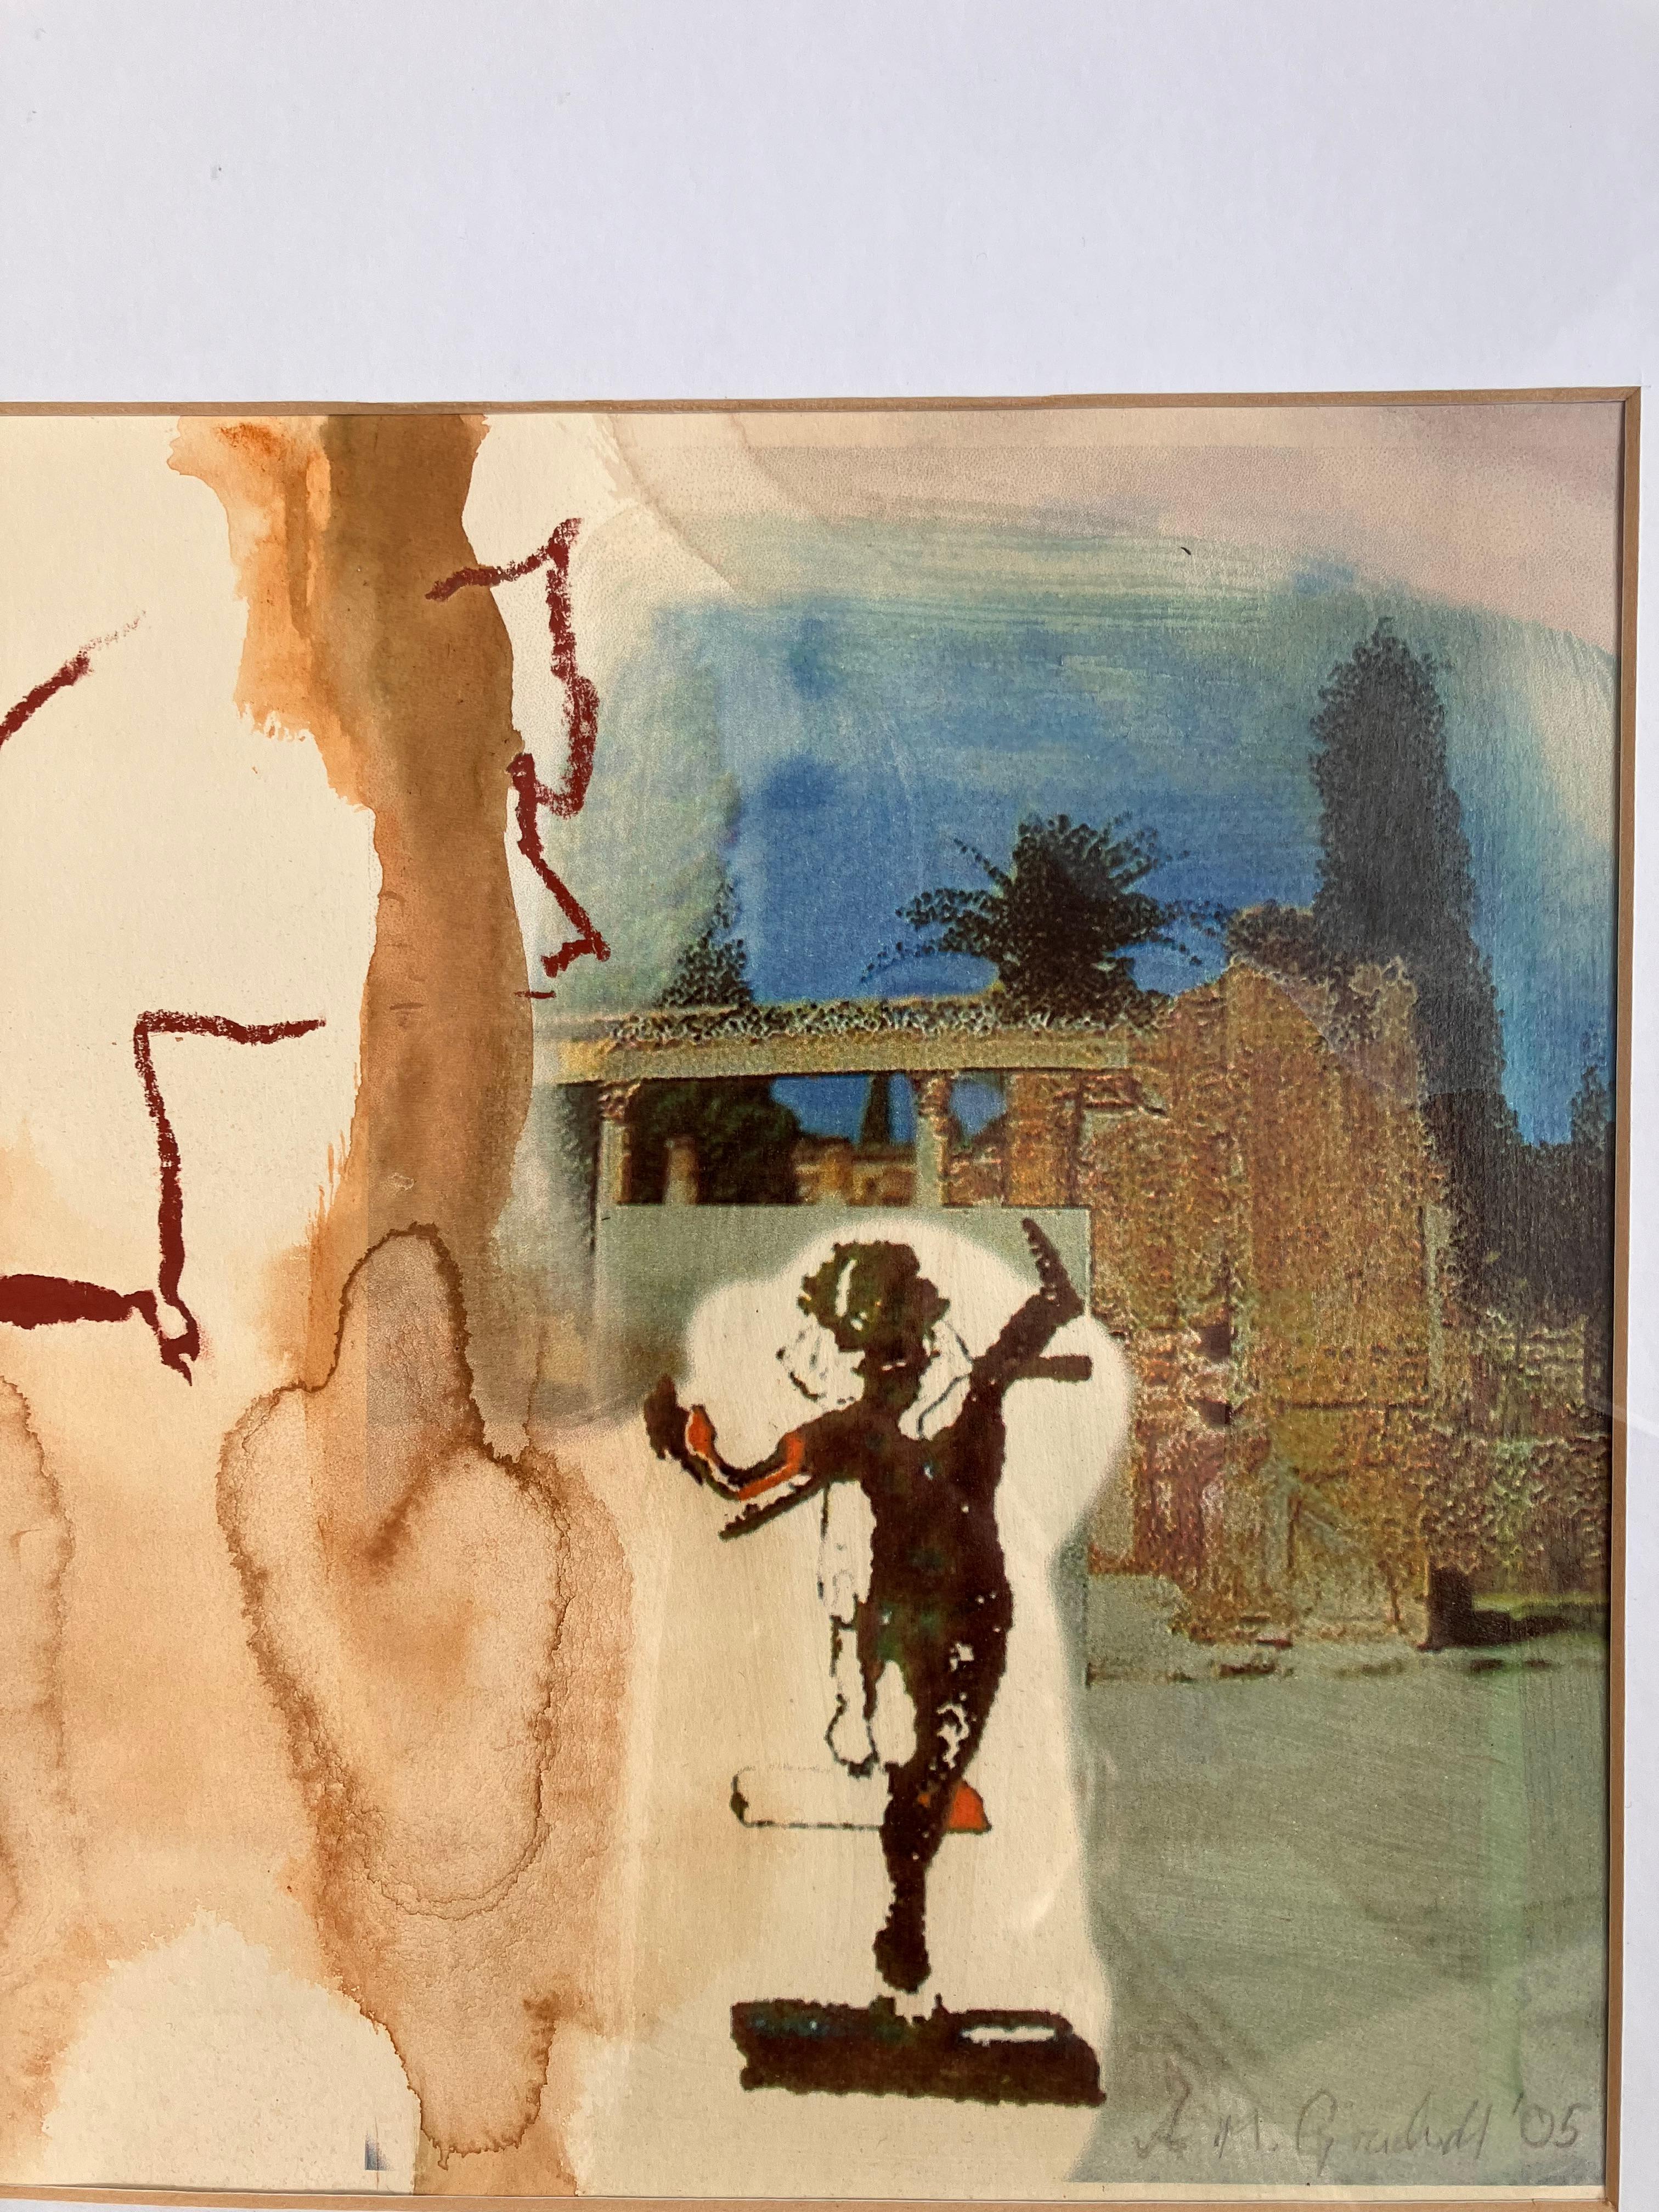 Pompei II, Unearthed Material. , signed mixed media painting c2005 - Beige Landscape Painting by Andy Gradwell